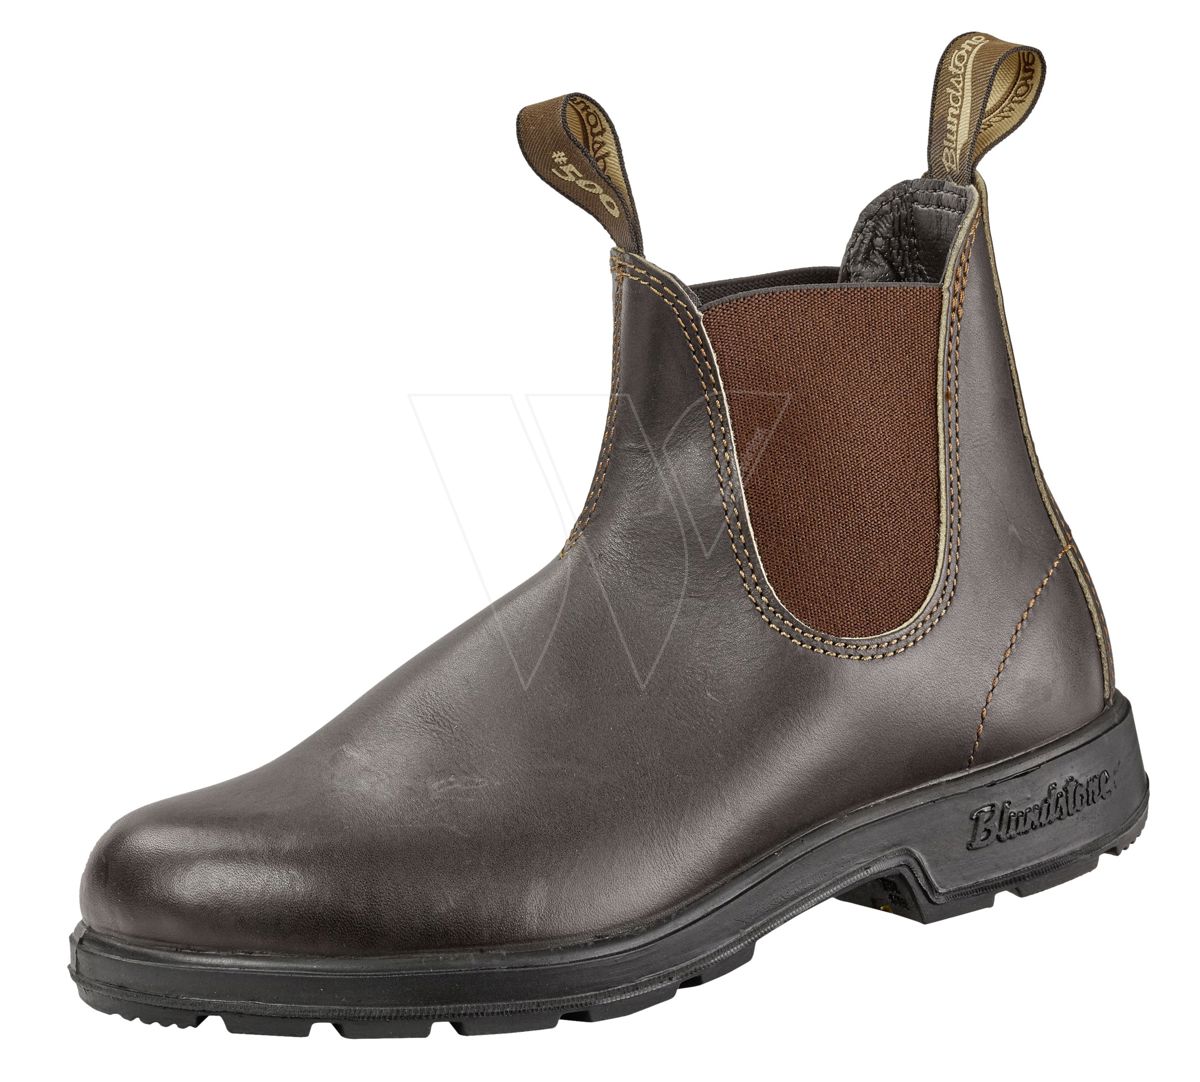 Blundstone 500 shoes size 42